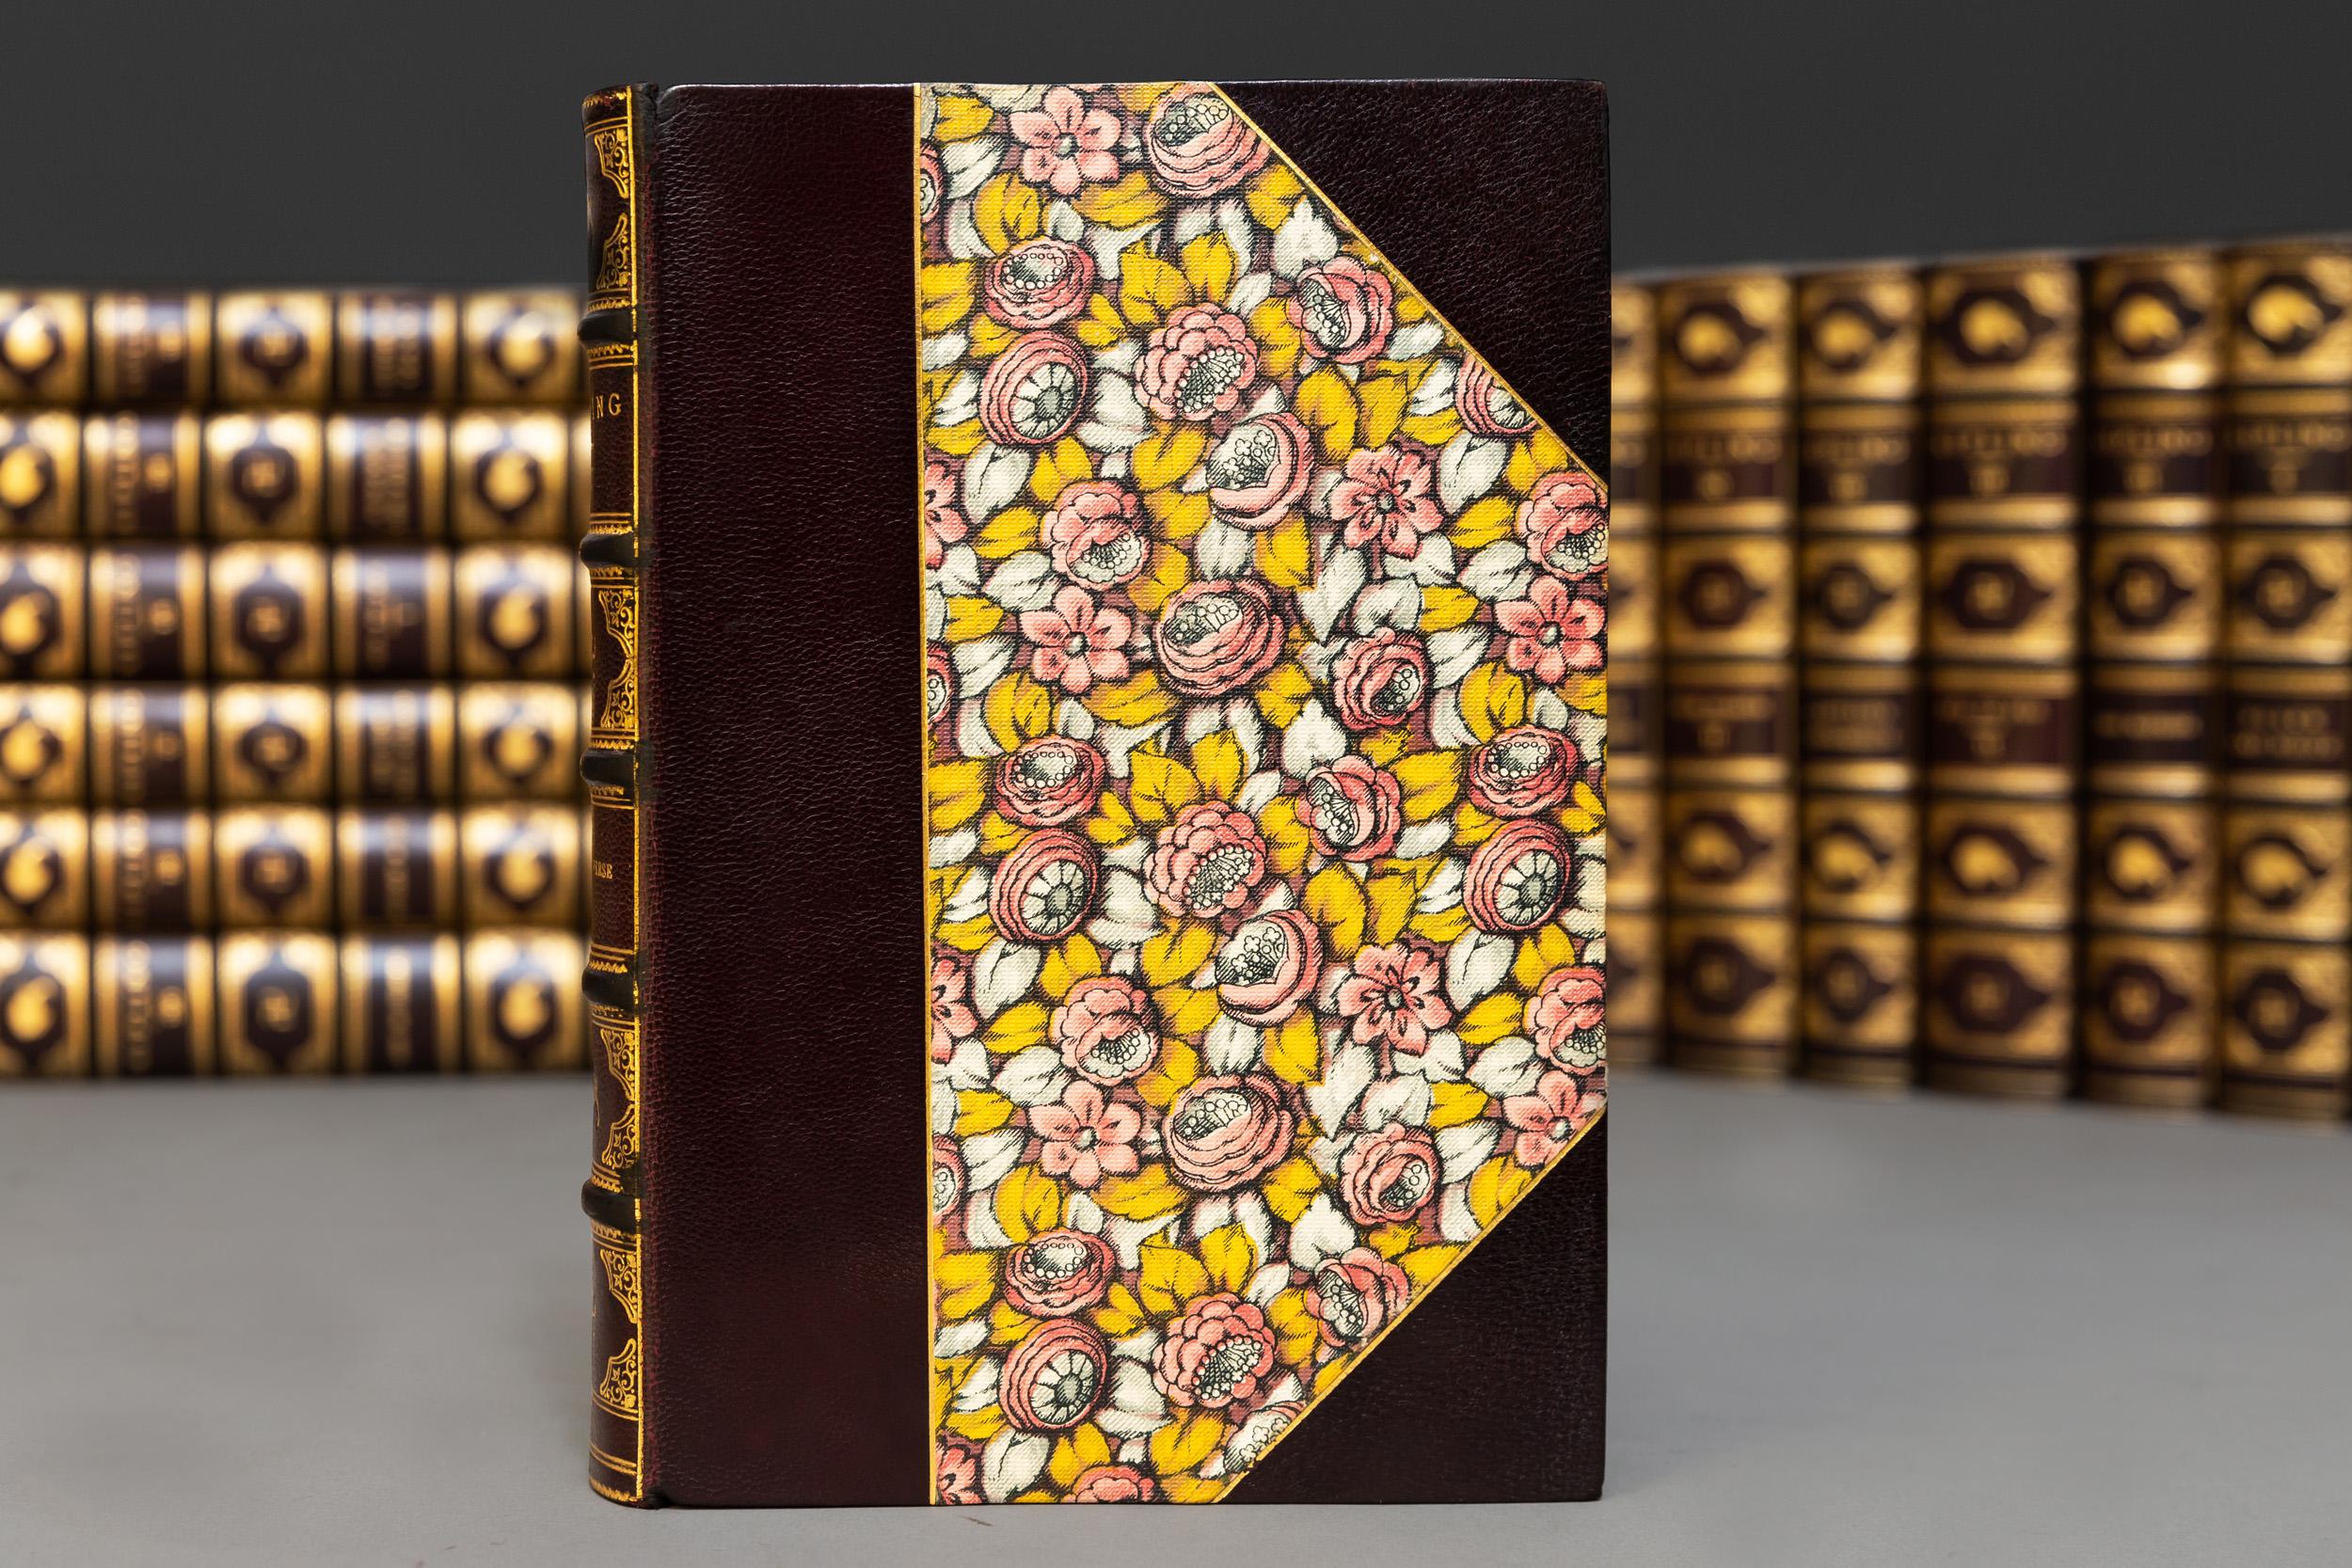 31 volumes

Bound in 3/4 purple Morocco, decorative cloth board, top edges gilt, raised bands, gilt on panels, illustrated.

Published: New York: Charles Scribner’s Sons 1897. 

Handsome set

(Note the sign on the spine is a Hindu symbol,